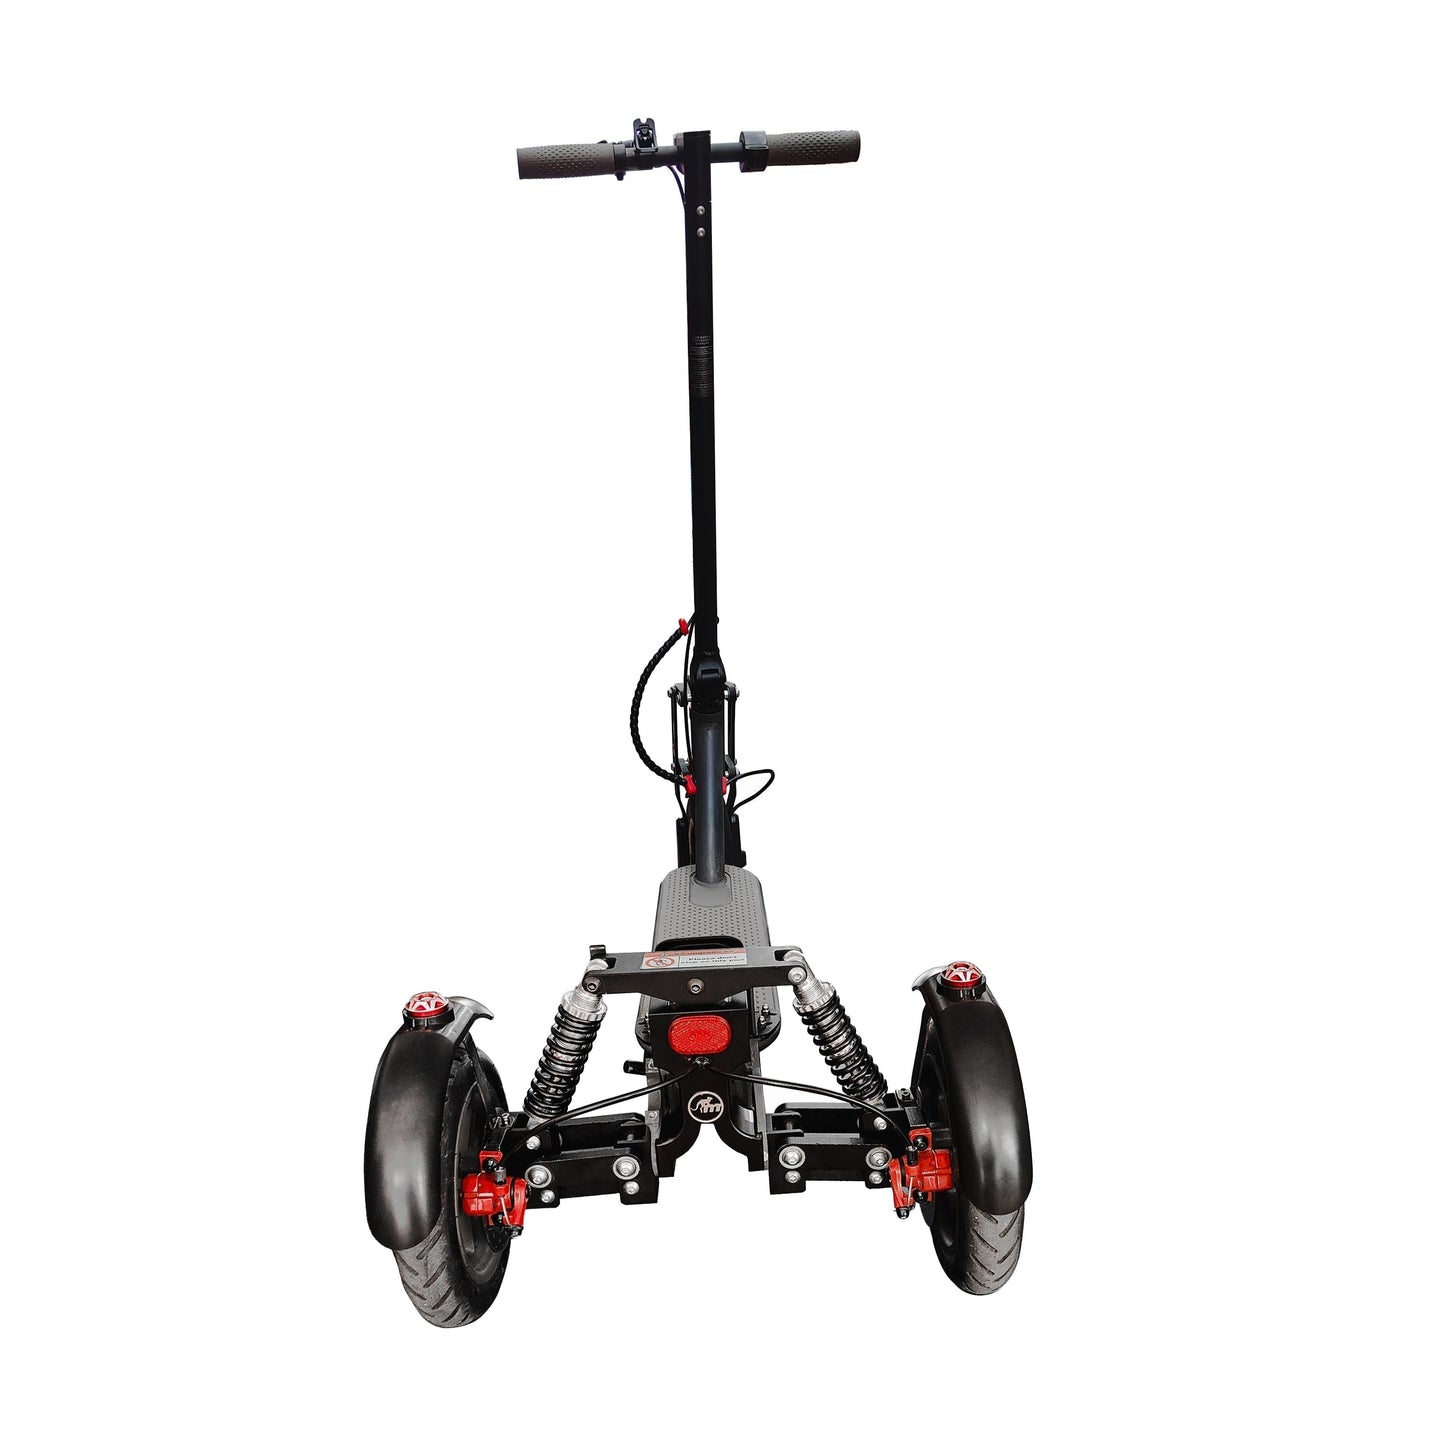 Monorim X3 upgrade kit to be Three wheels special for Porovo Lifestyle Scooter